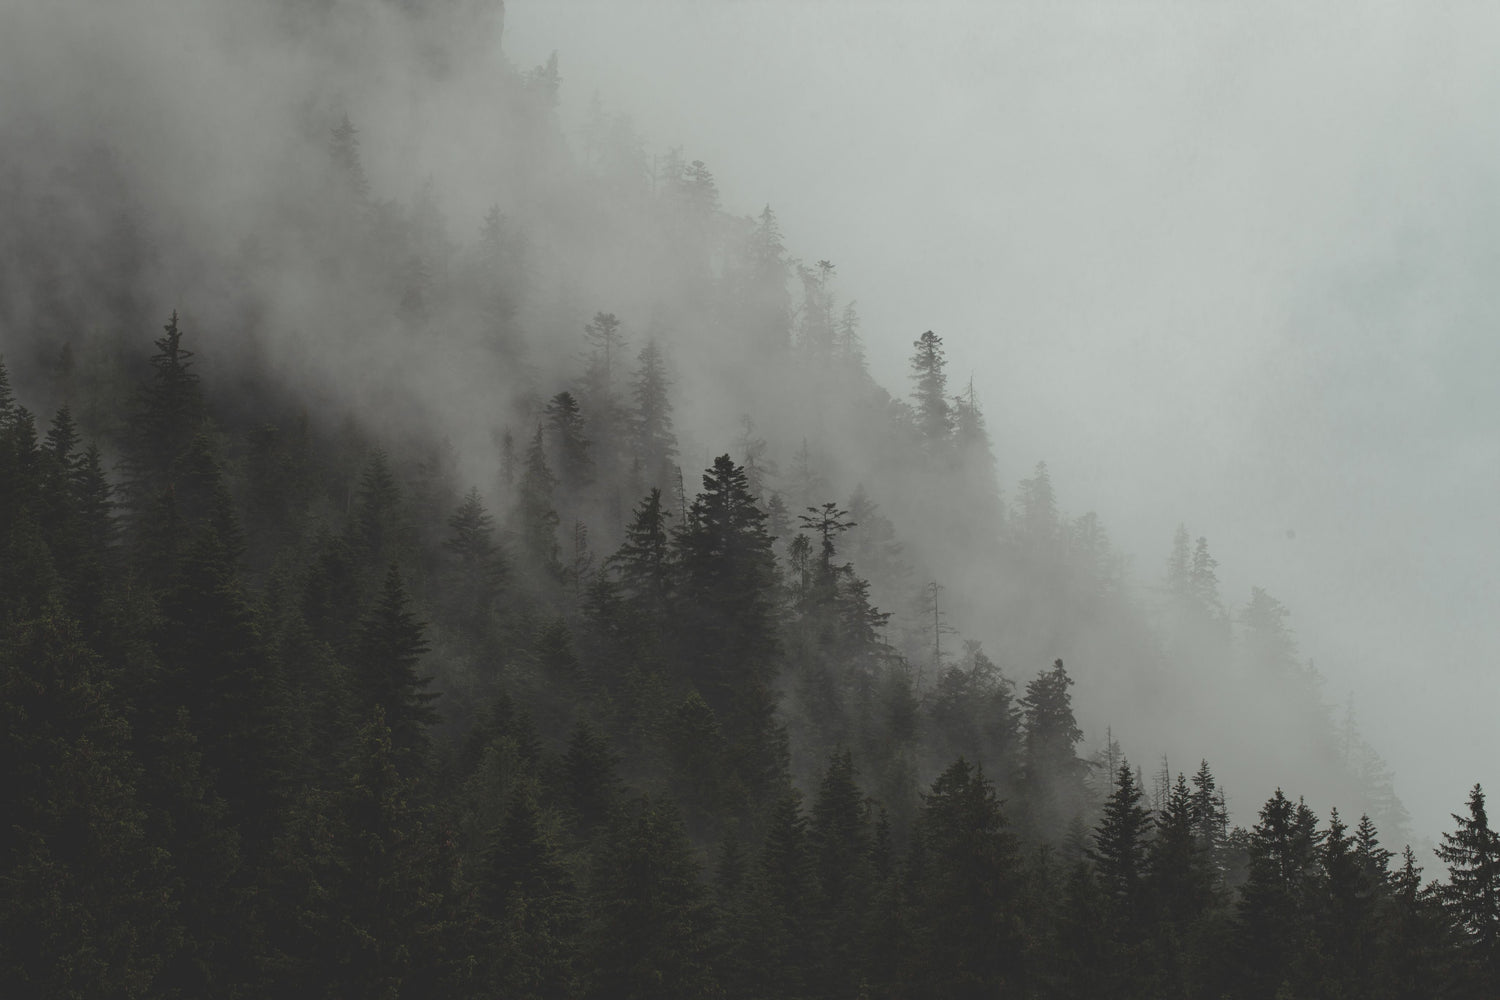 image of a mountain forest with evergreen trees blanketed in fog